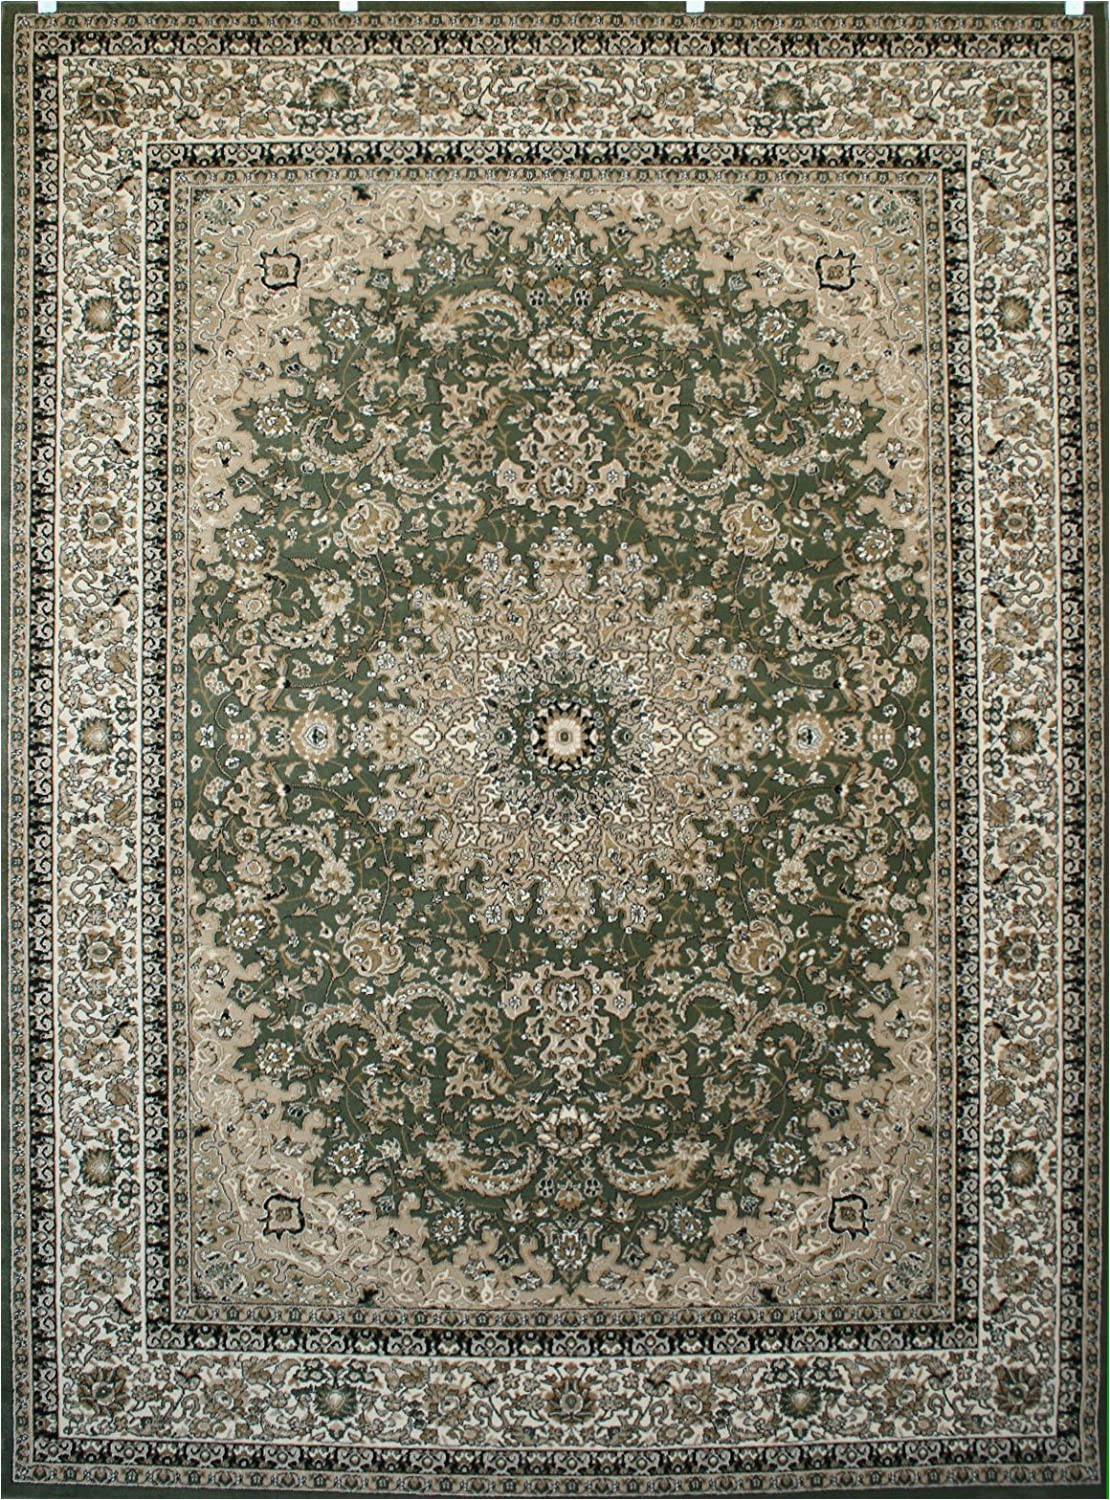 Sage Green area Rug 5×7 Feraghan New City Traditional isfahan Wool Persian area Rug 4 Round Sage Green